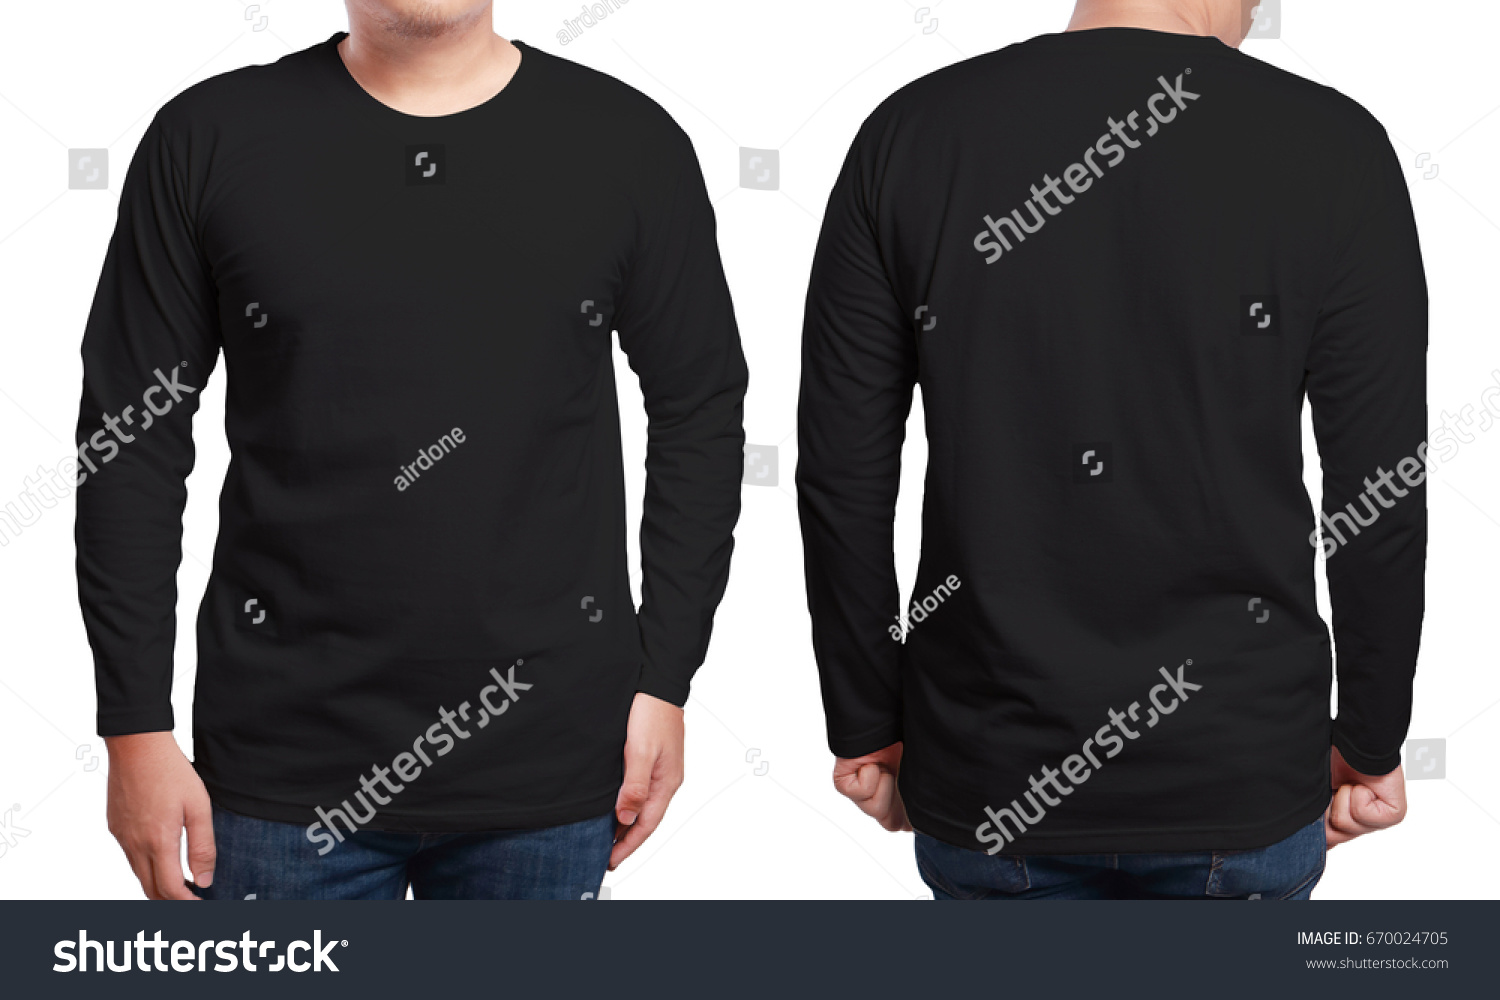 Black long sleeved t-shirt mock up, front and back view, isolated. Male model wear plain black shirt mockup. Long sleeve shirt design template. Blank tees for print #670024705